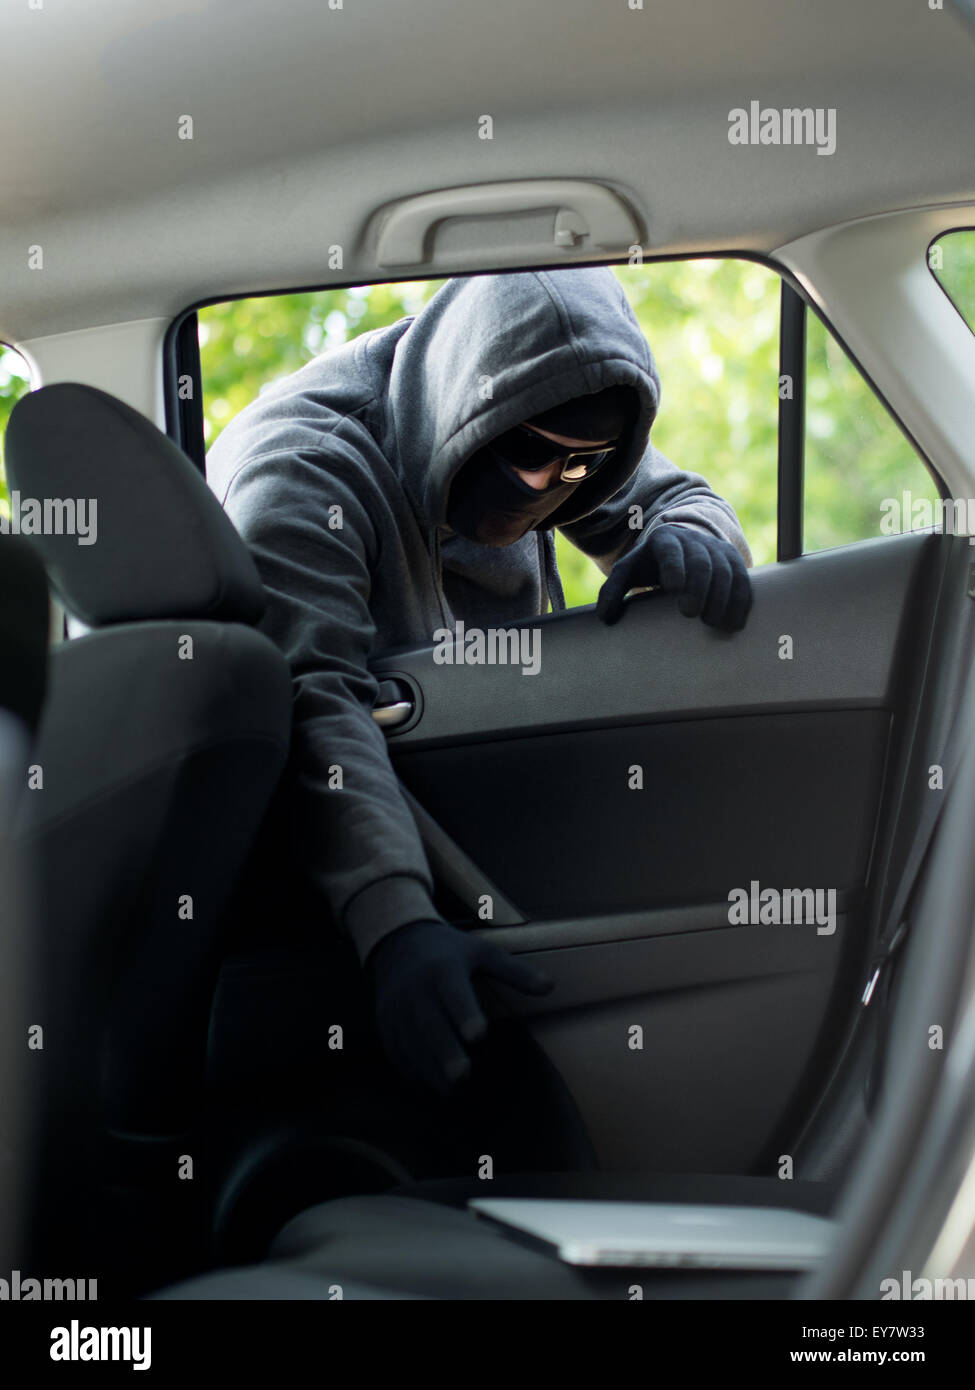 Car theft - a laptop being stolen through the window of an unoccupied car. Stock Photo